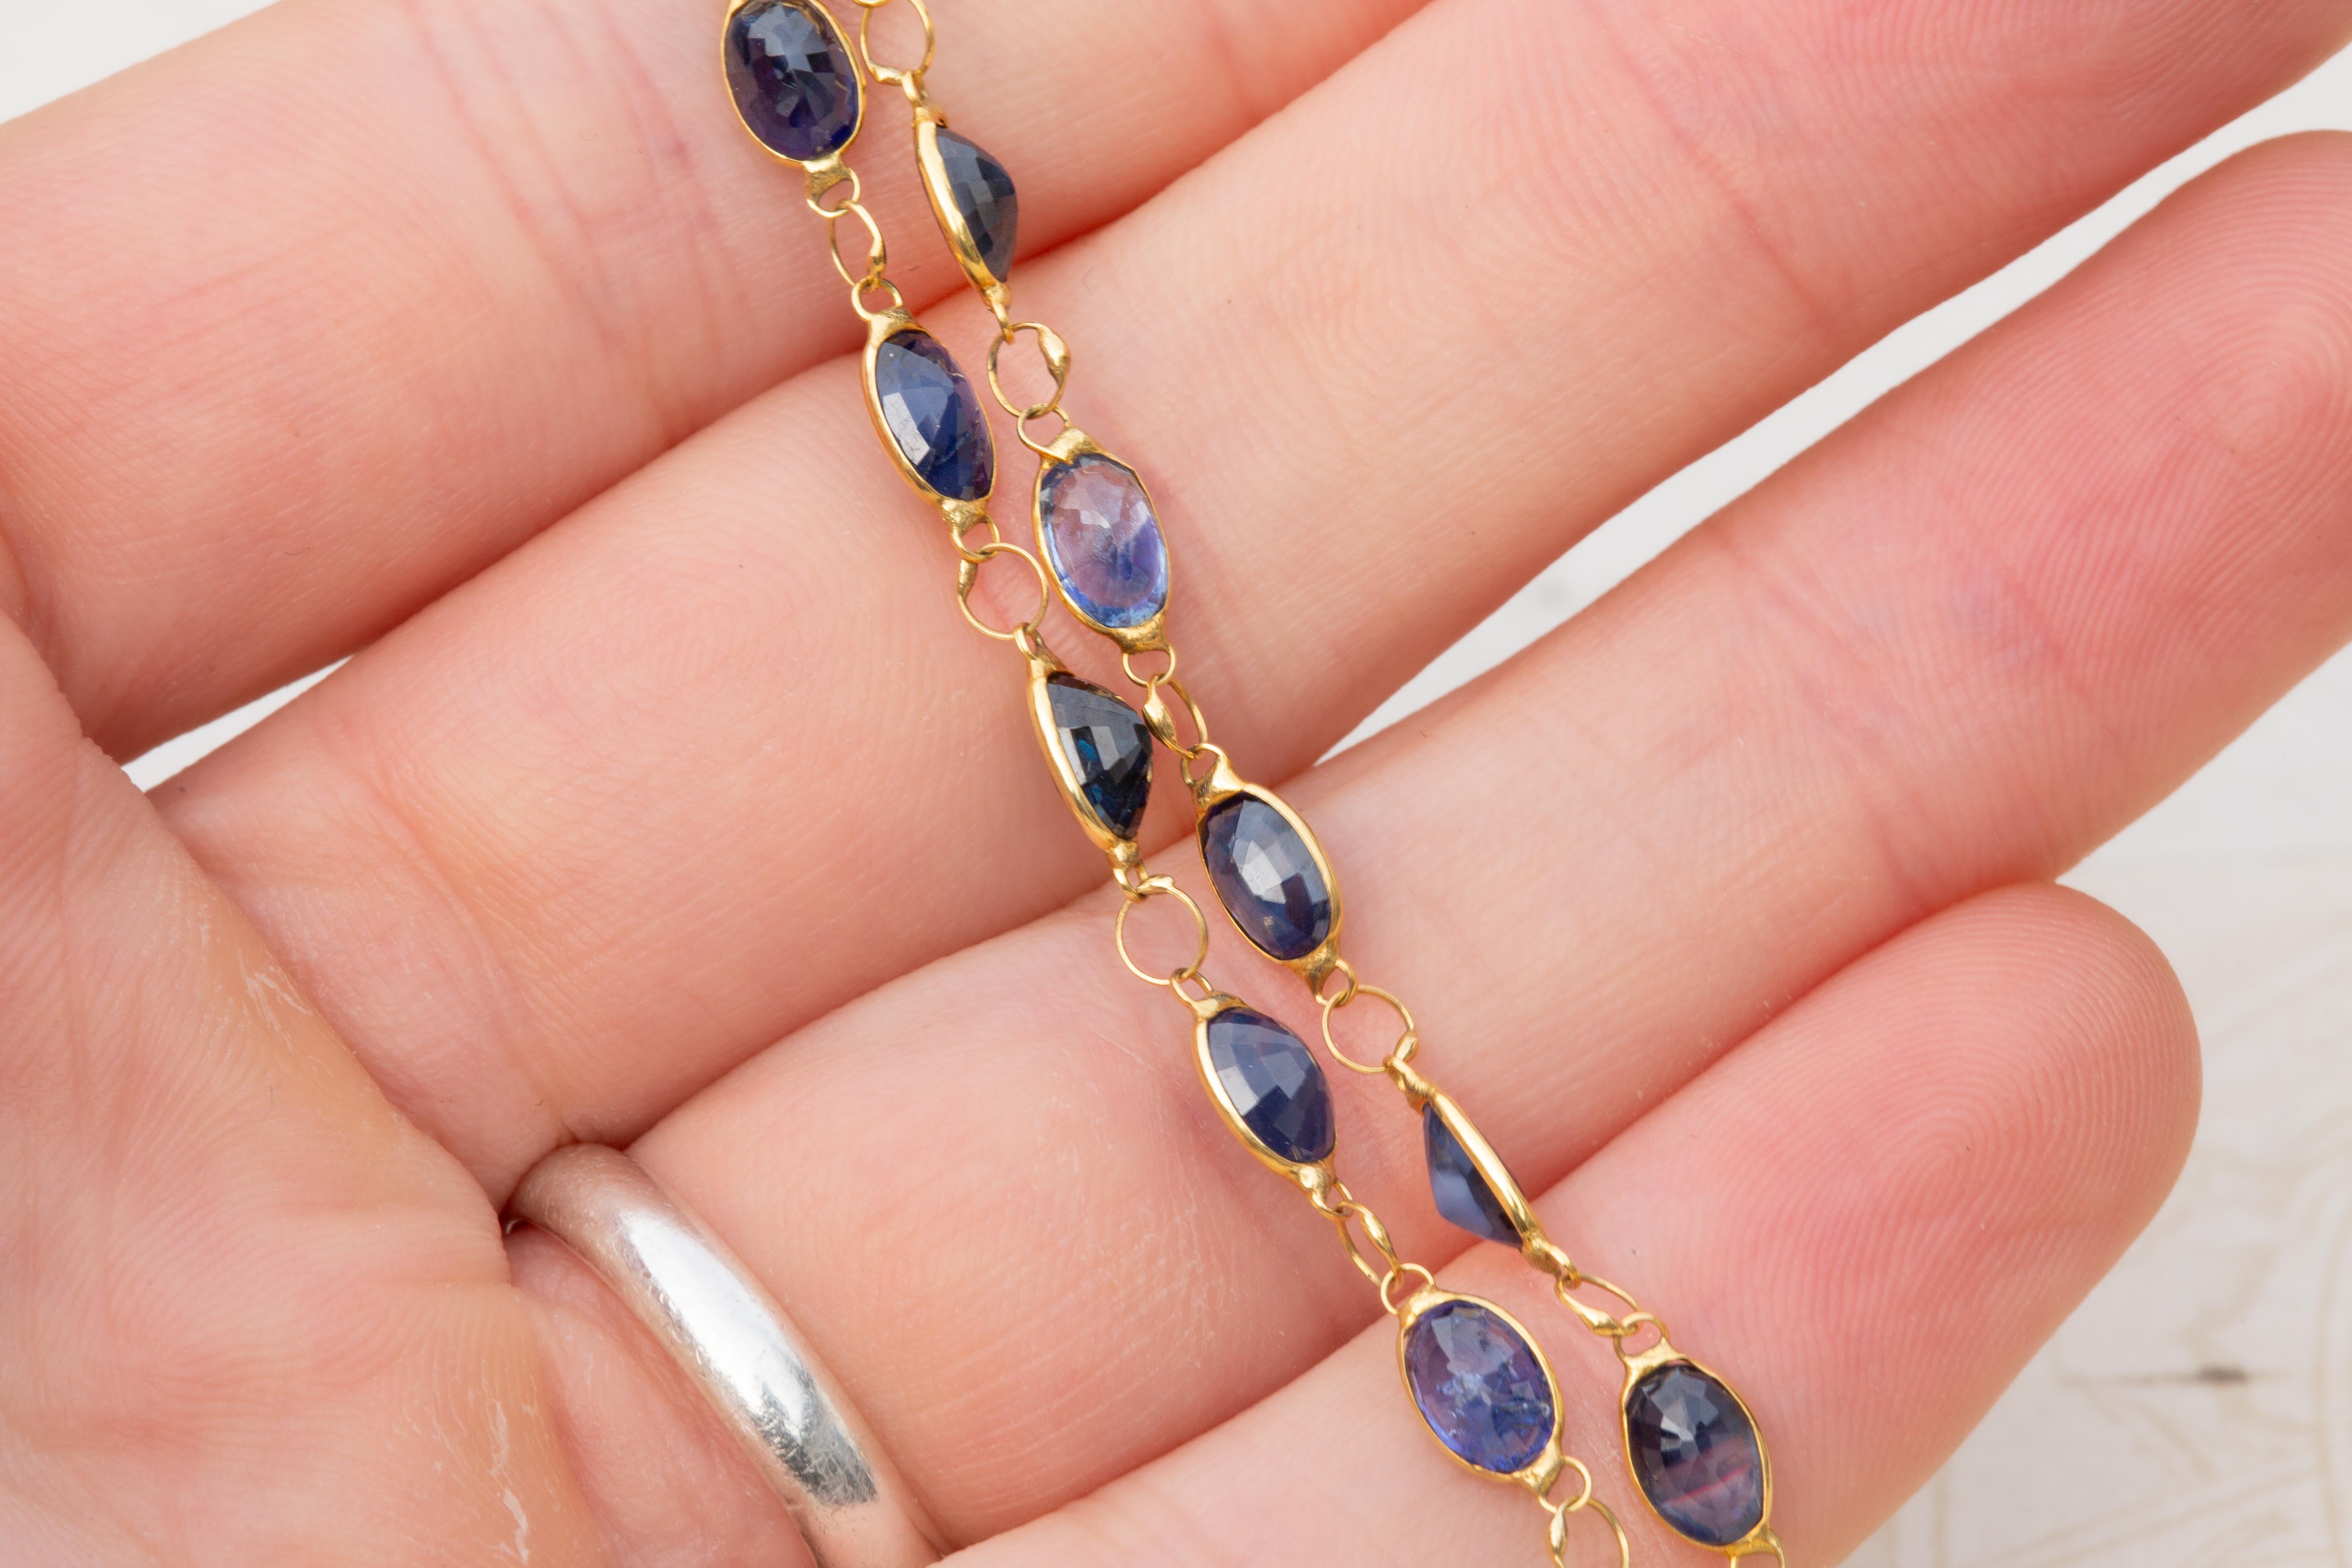 Vintage Mixed-Cut Natural Sapphire Necklace Chain 13cts Total For Sale 1